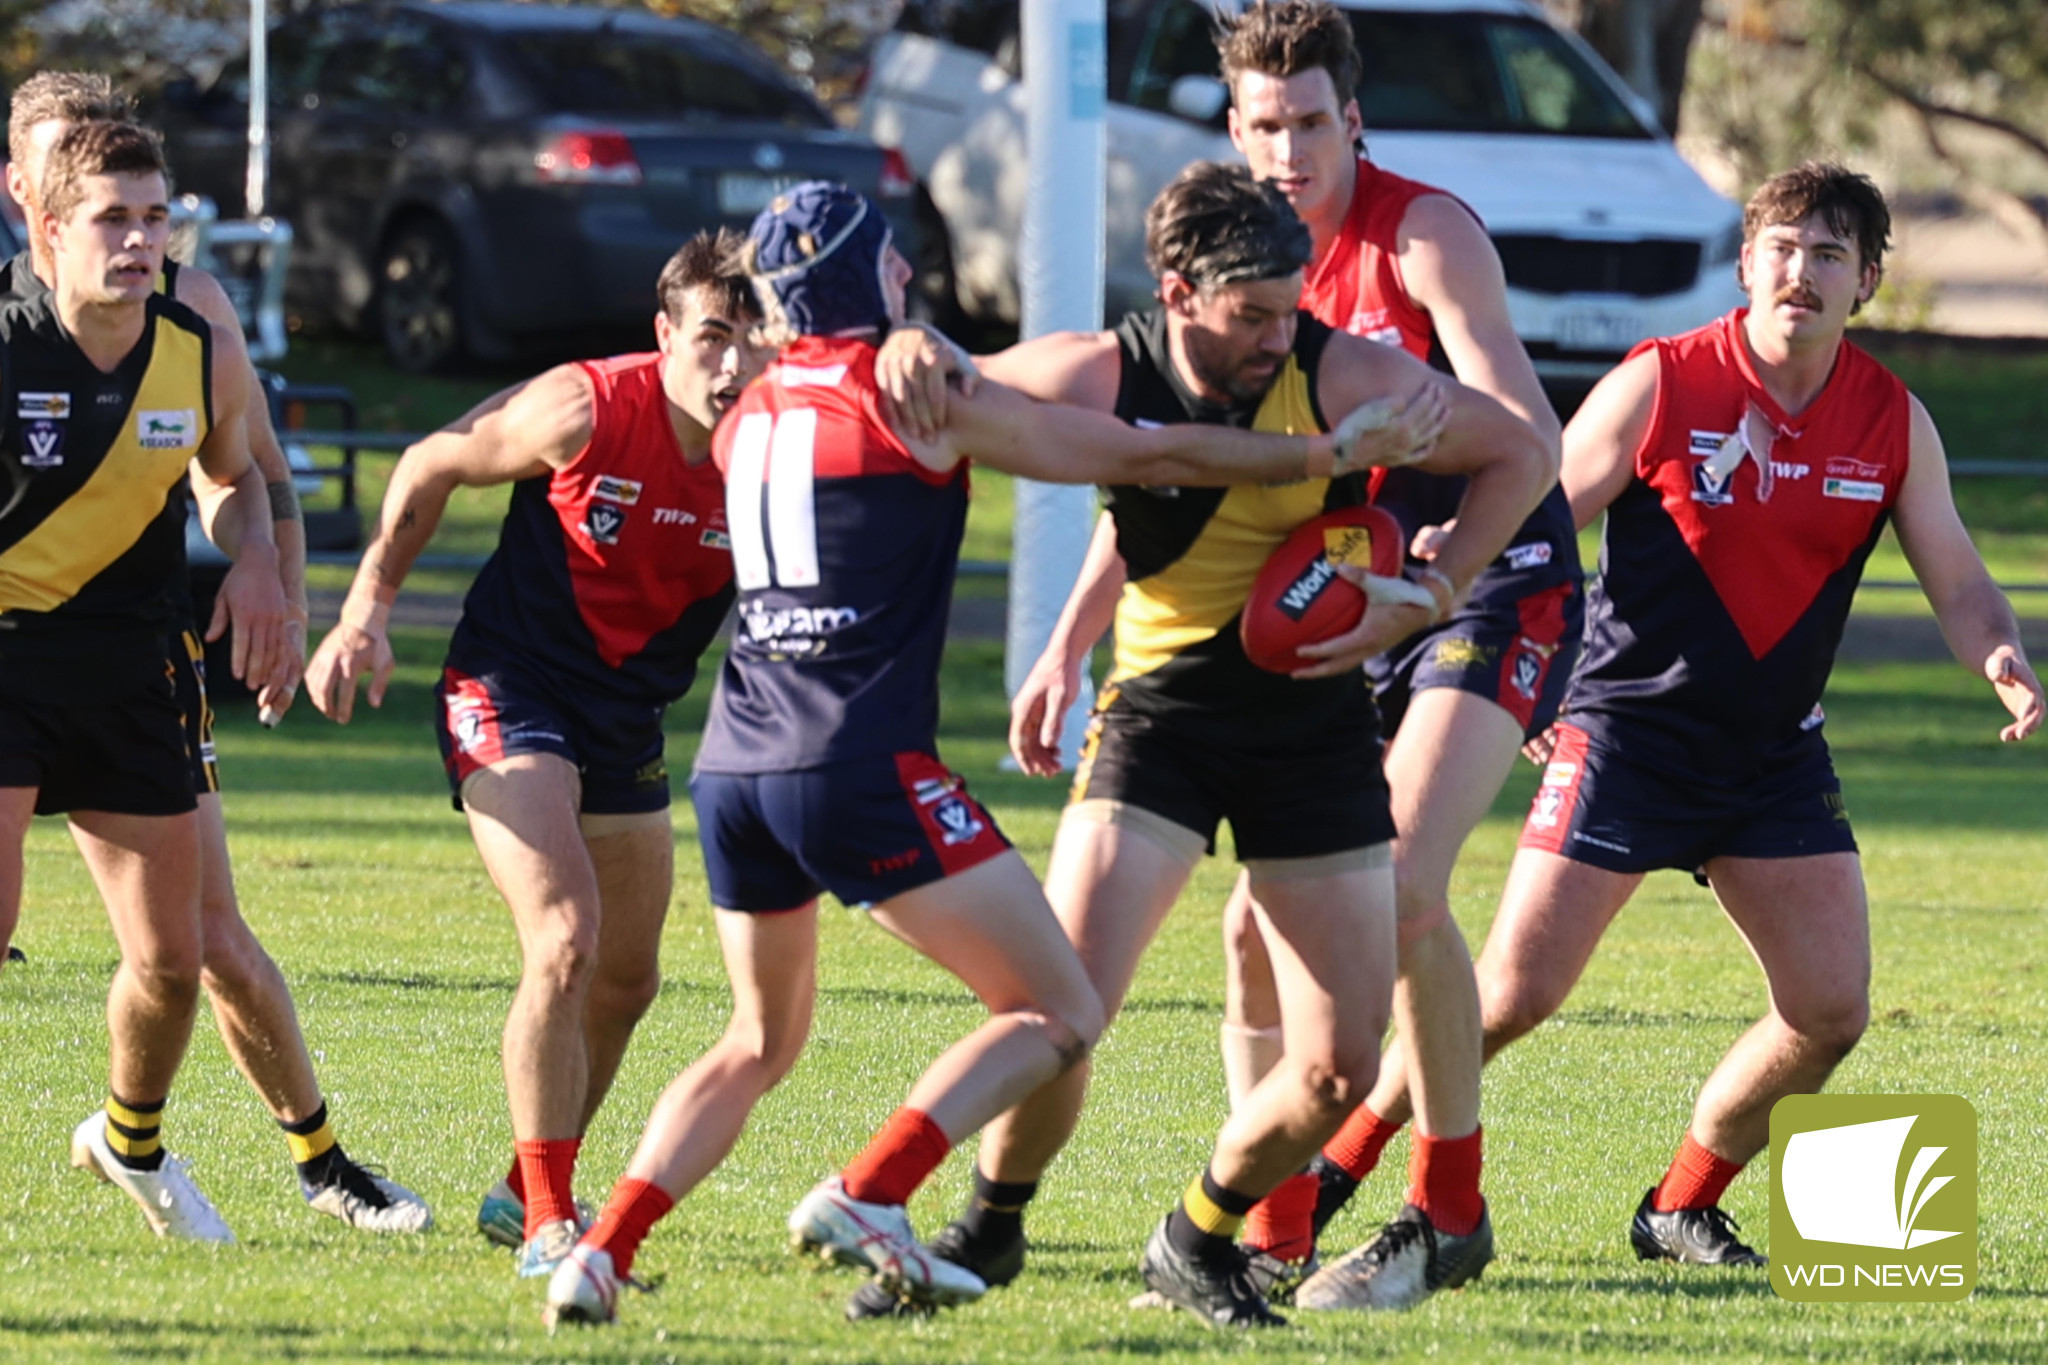 Narrow loss for Demons - feature photo